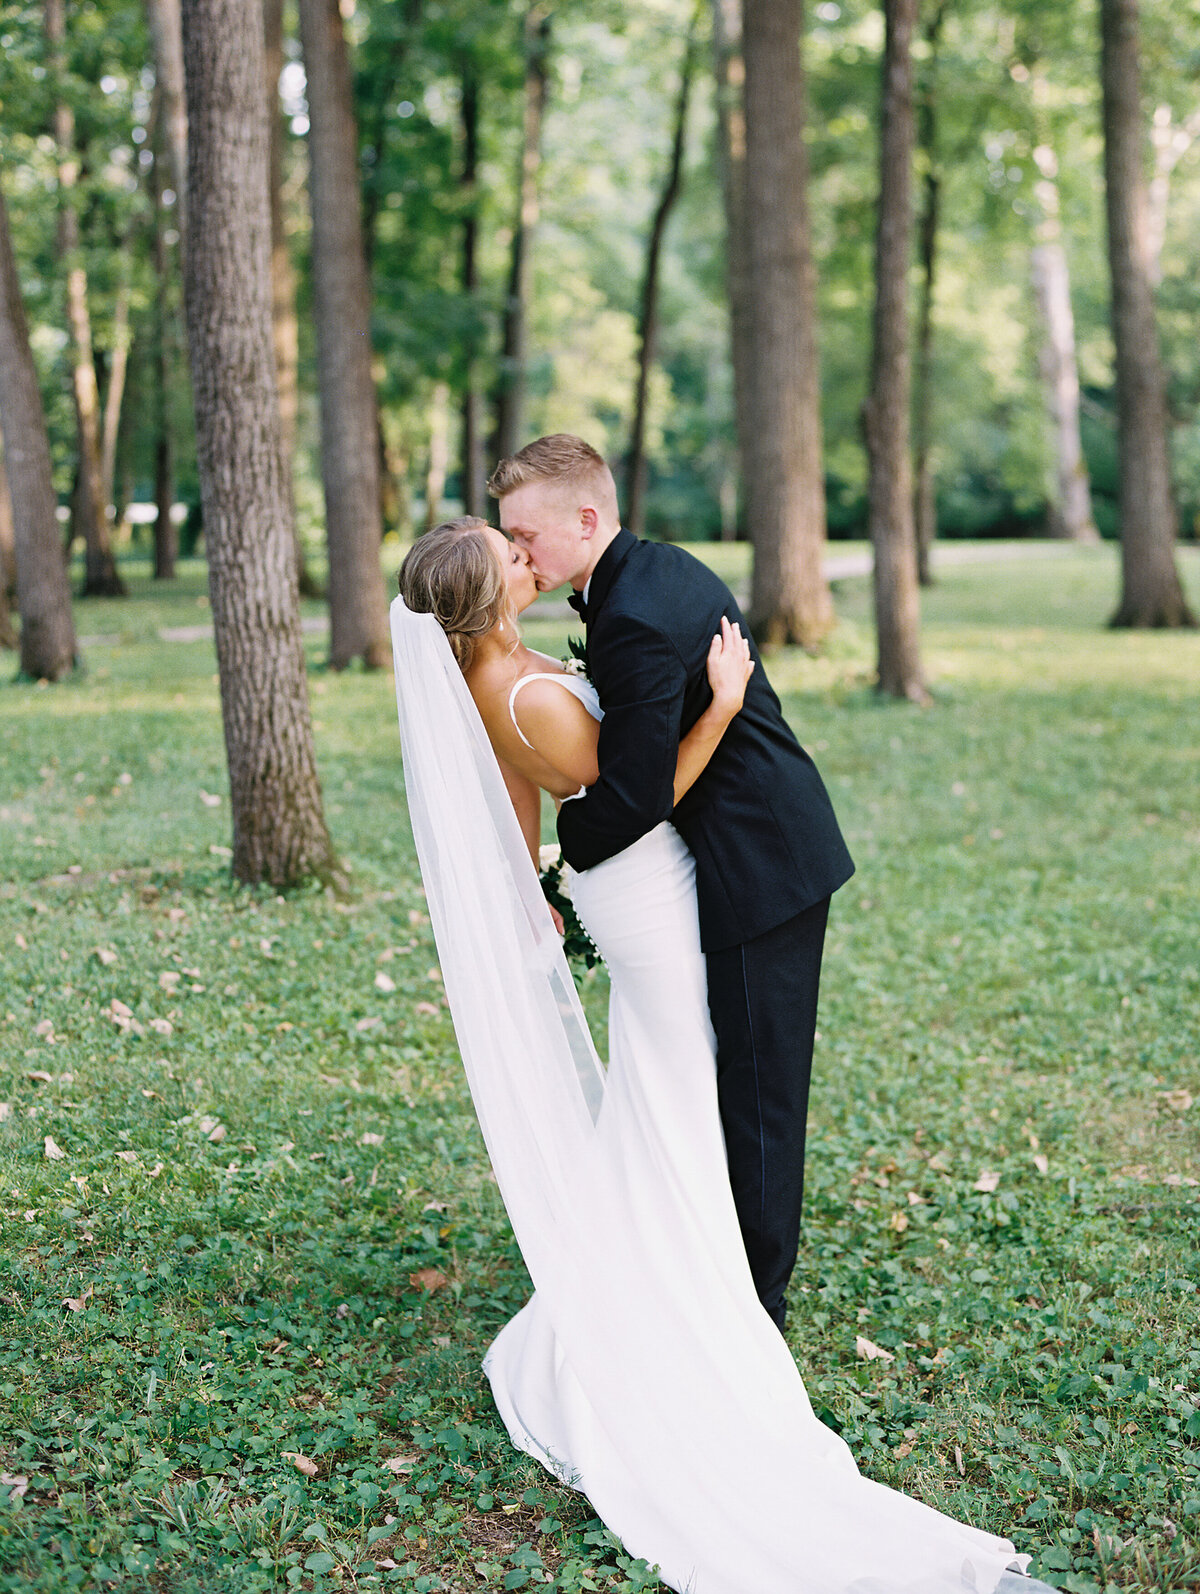 Bride and groom kissing surrounded by trees photographed by Chicago editorial wedding photographer Arielle Peters